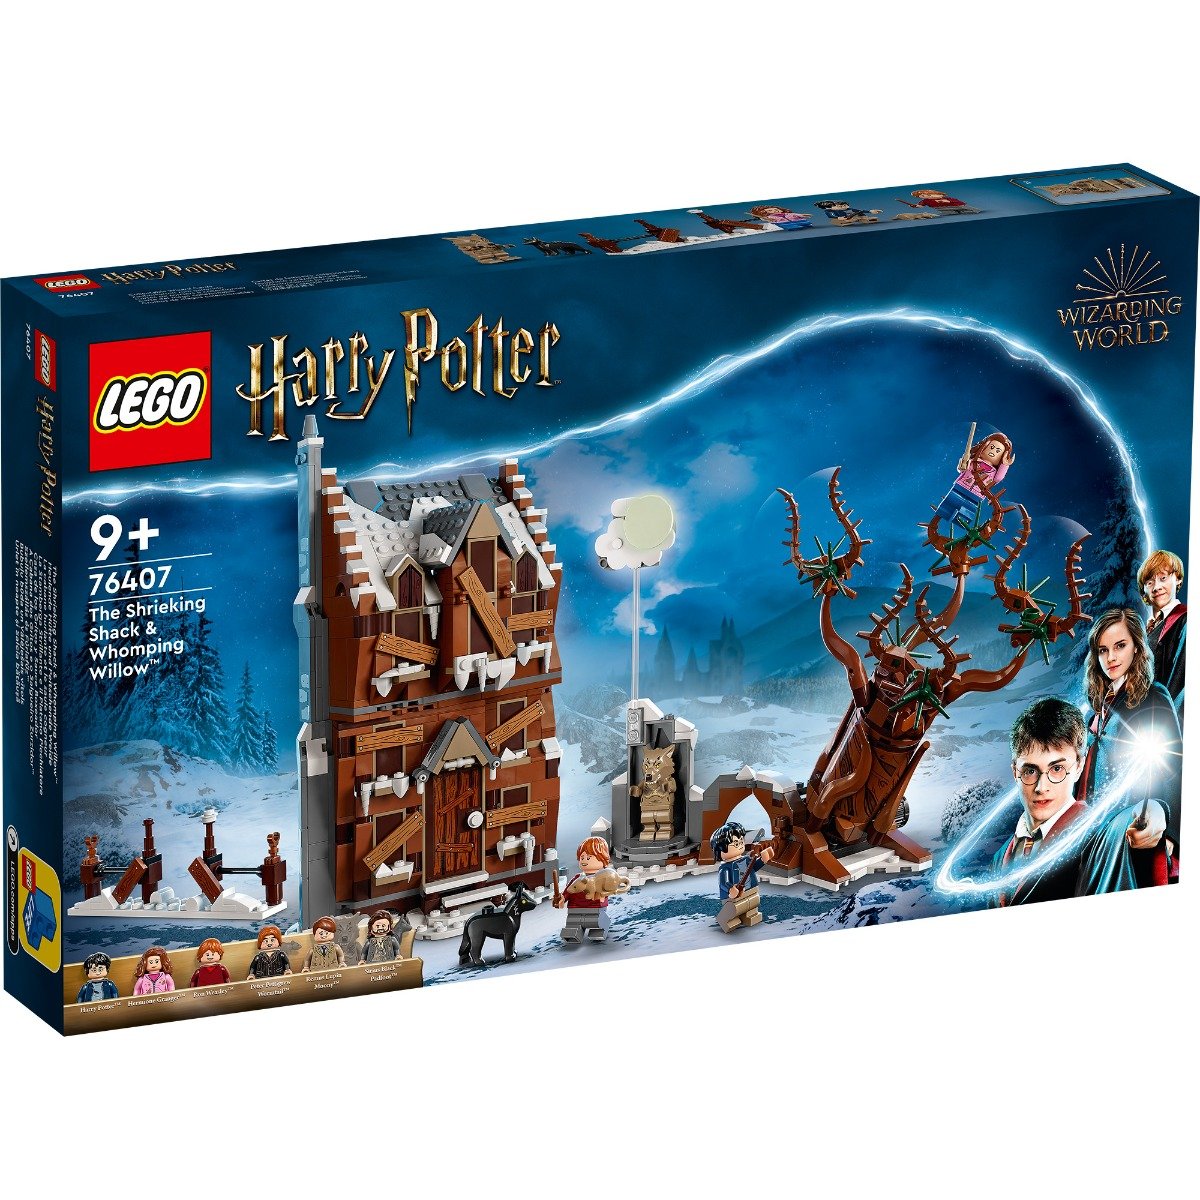 LEGO® Harry Potter – Urlet in noapte si Whomping Willow™ (76407) (76407)